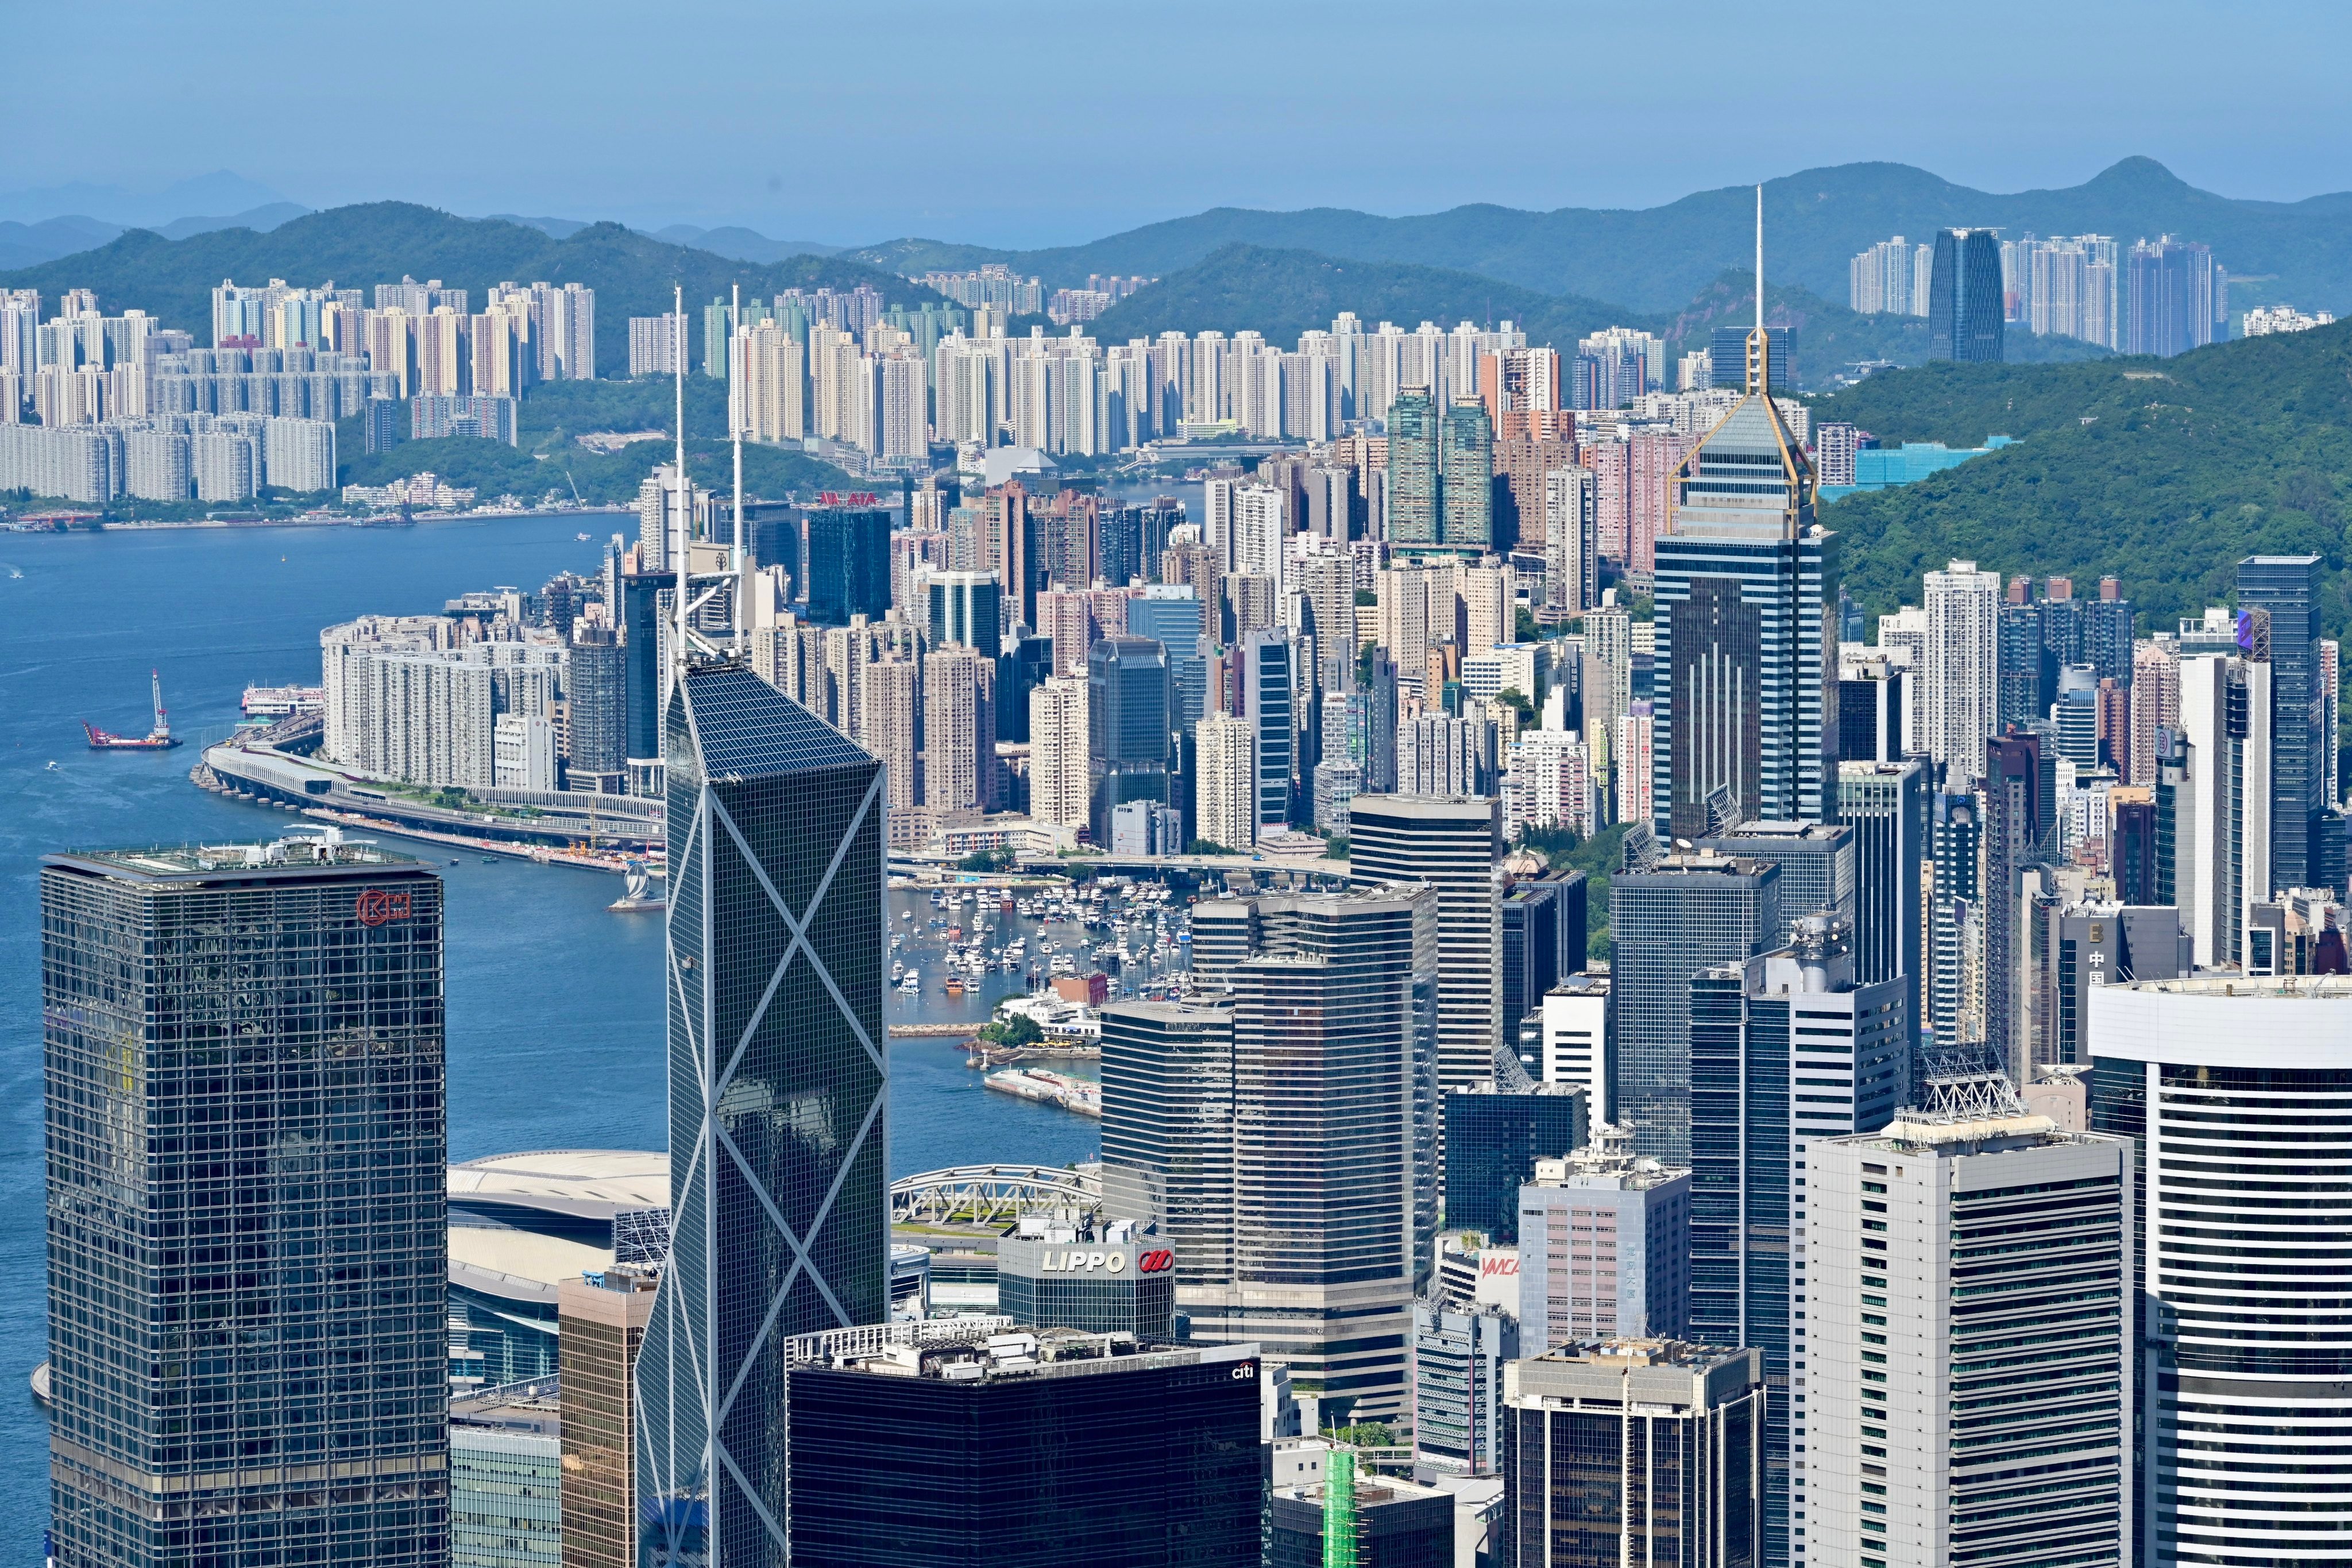 Hong Kong has a thriving business ecosystem that supports the investment needs of family offices.
